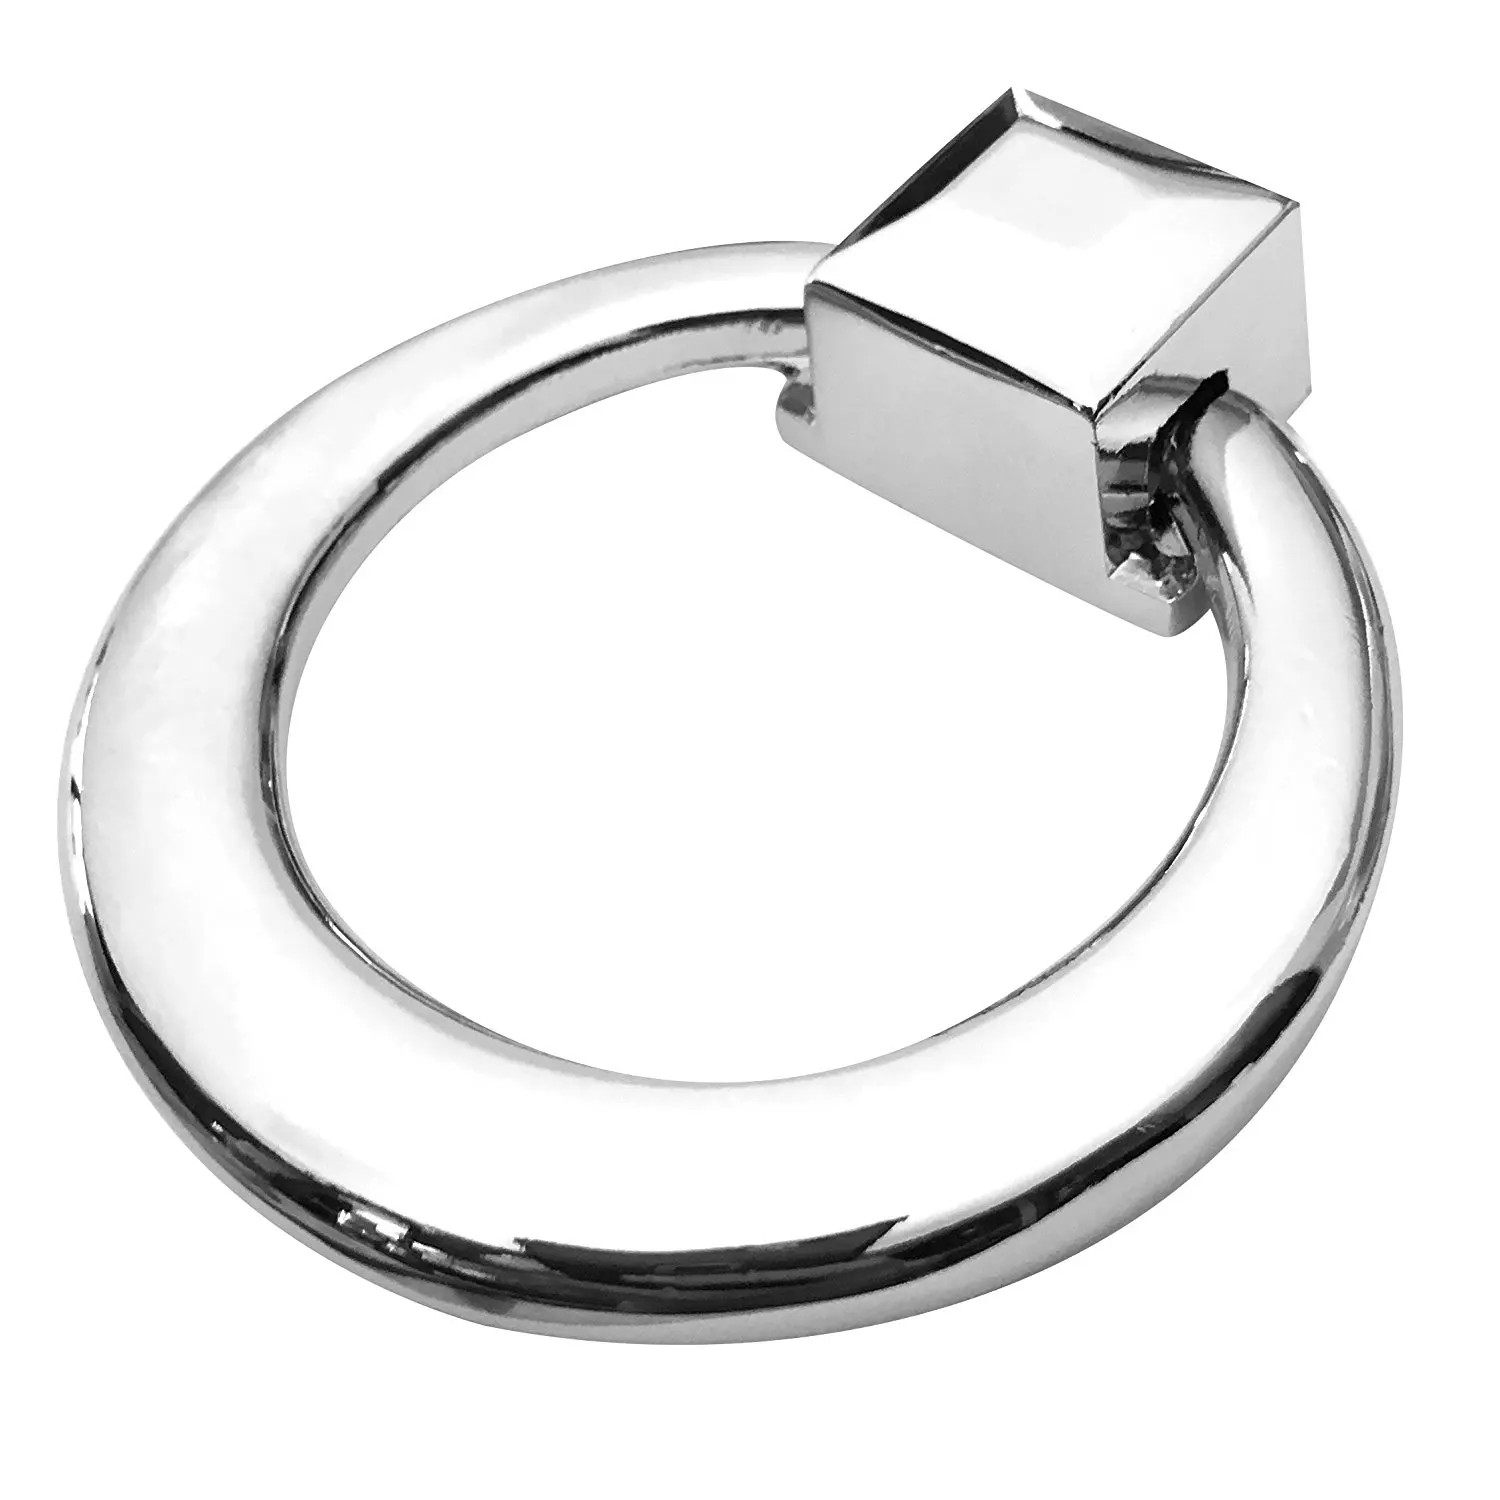 Buy Southern Hills Chrome Ring Pulls, Pack of 5 Drawer